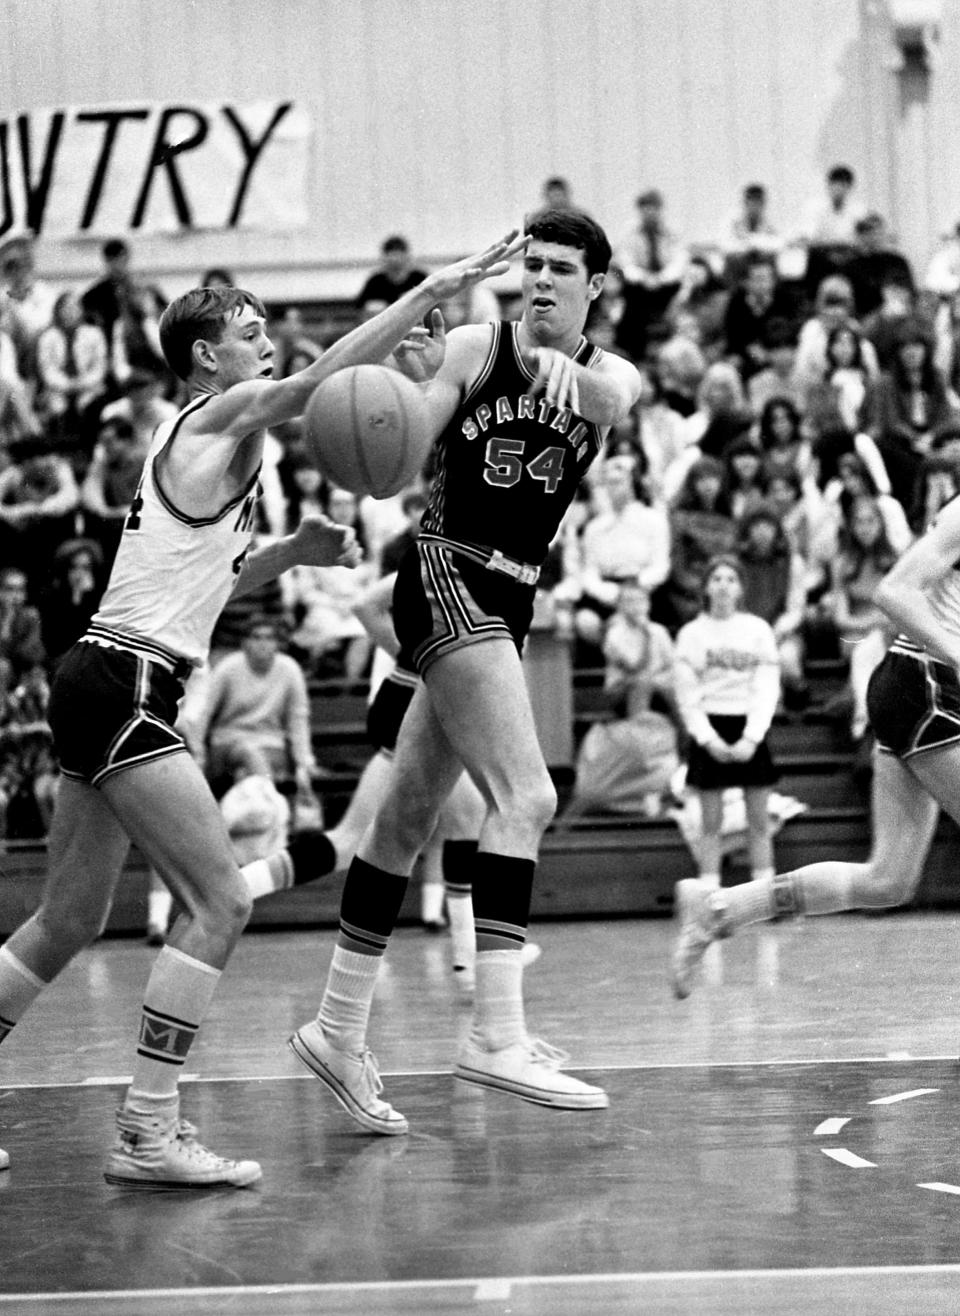 Stratford High 6-8 center Ray Maddux (54) battles with Maplewood High's Ken Lowery for control of the ball. Maddux, with 25 points and 21 rebounds, led Stratford to a 63-49 win on the road against Maplewood on Dec. 10, 1968.